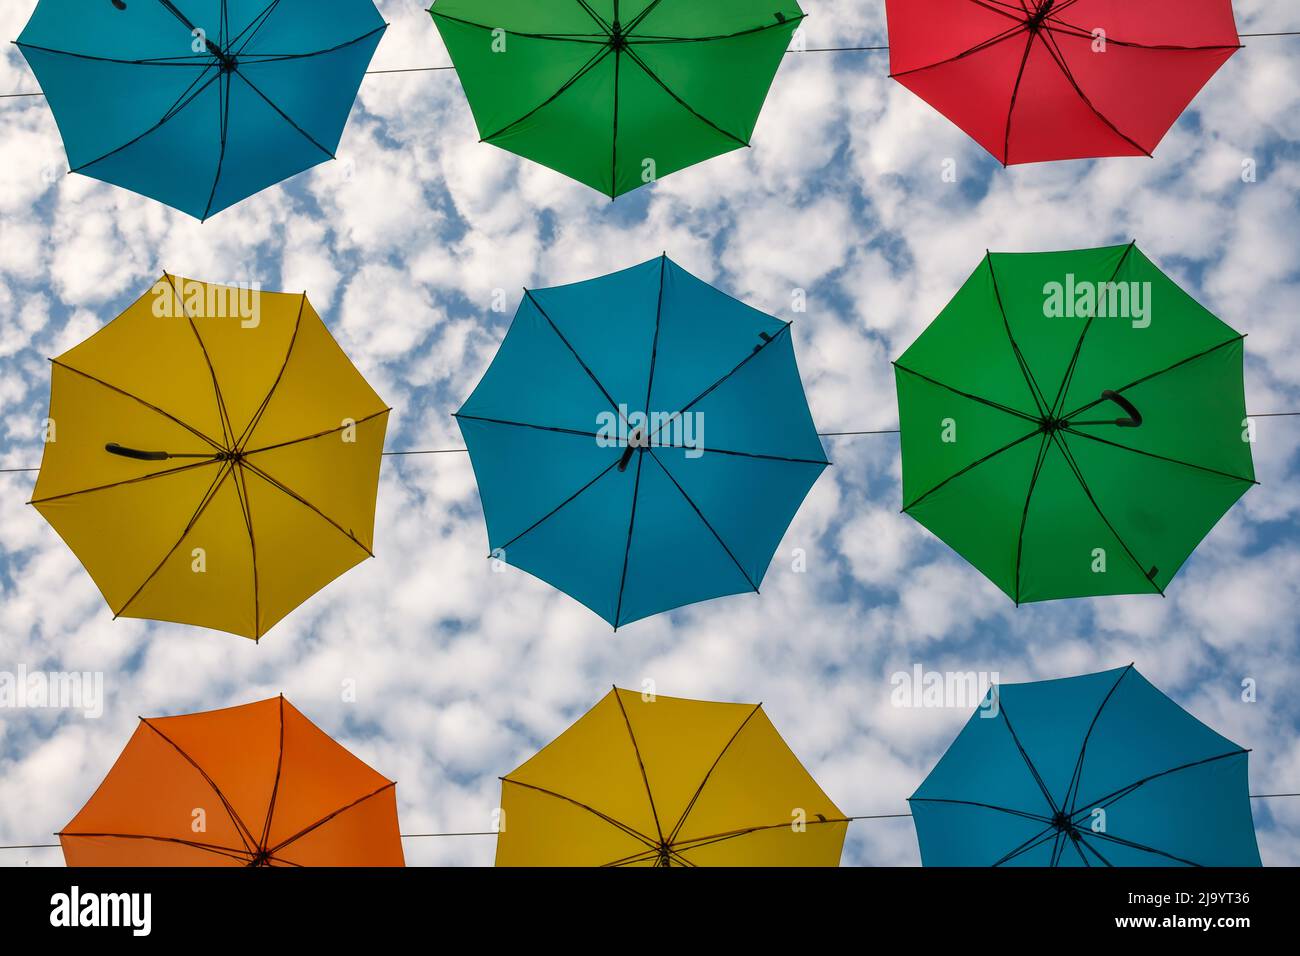 Colorful hanging umbrellas and a cloudy blue sky in the backround Stock Photo